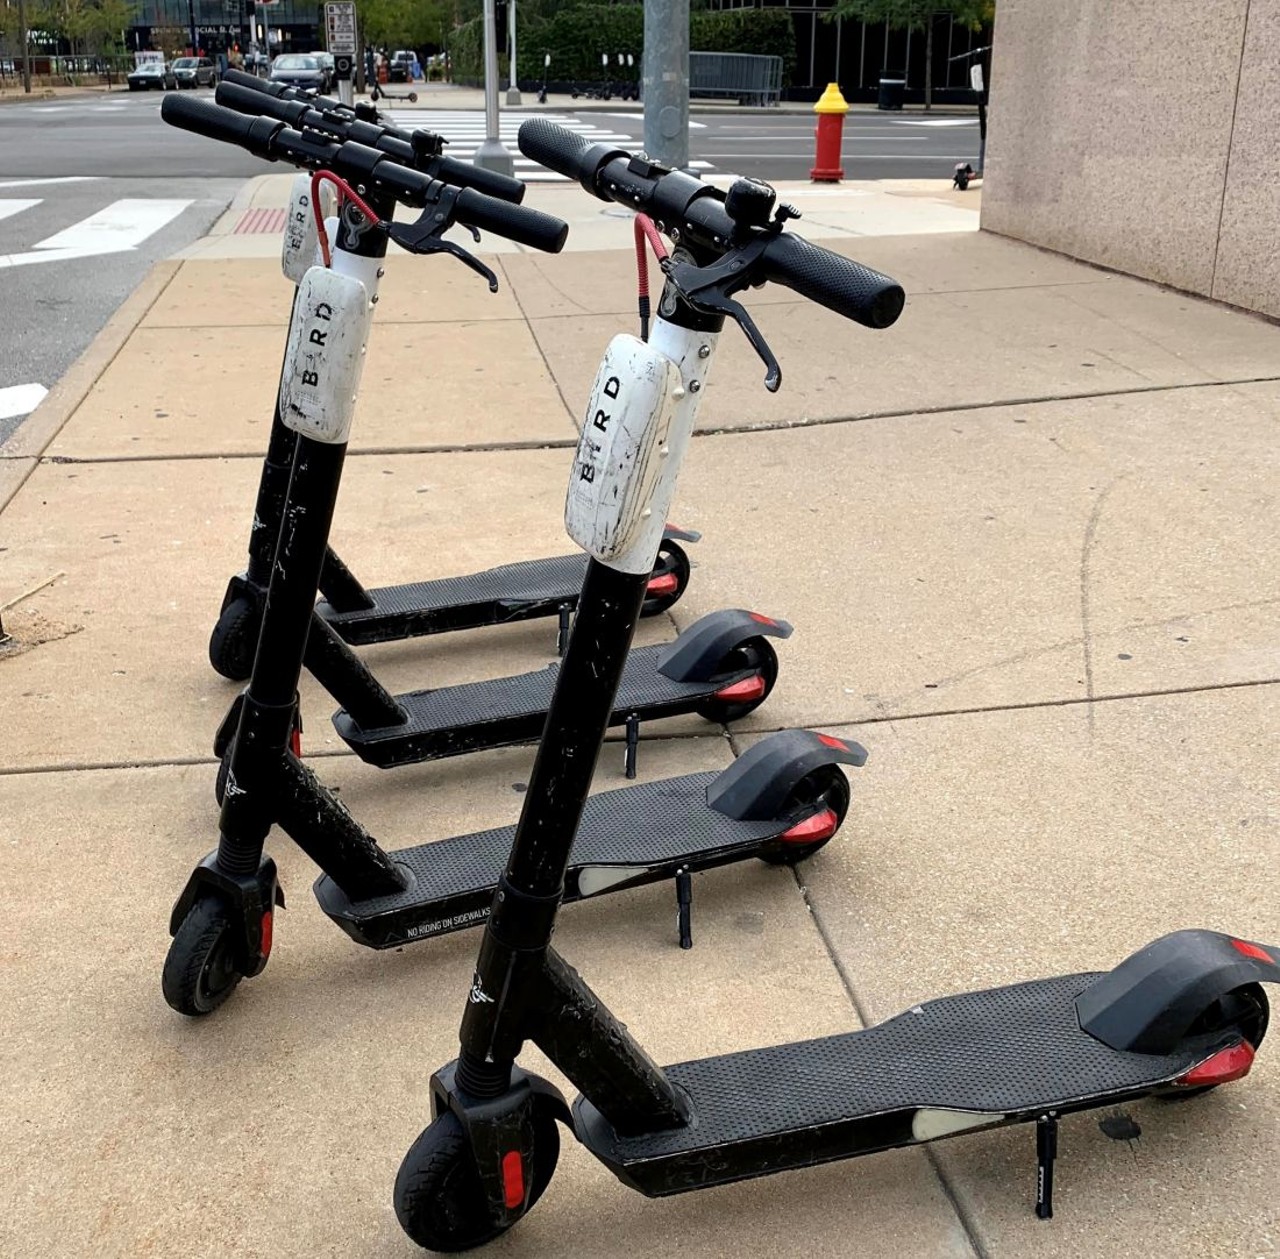 Bird City Scooters
Located through St. Louis especially Downtown St. Louis and Forest Park
Bird Scooters cost $1 for base fare and then $0.15 per minute
Photo credit: Riverfront Times / @riverfronttimes on Instagram